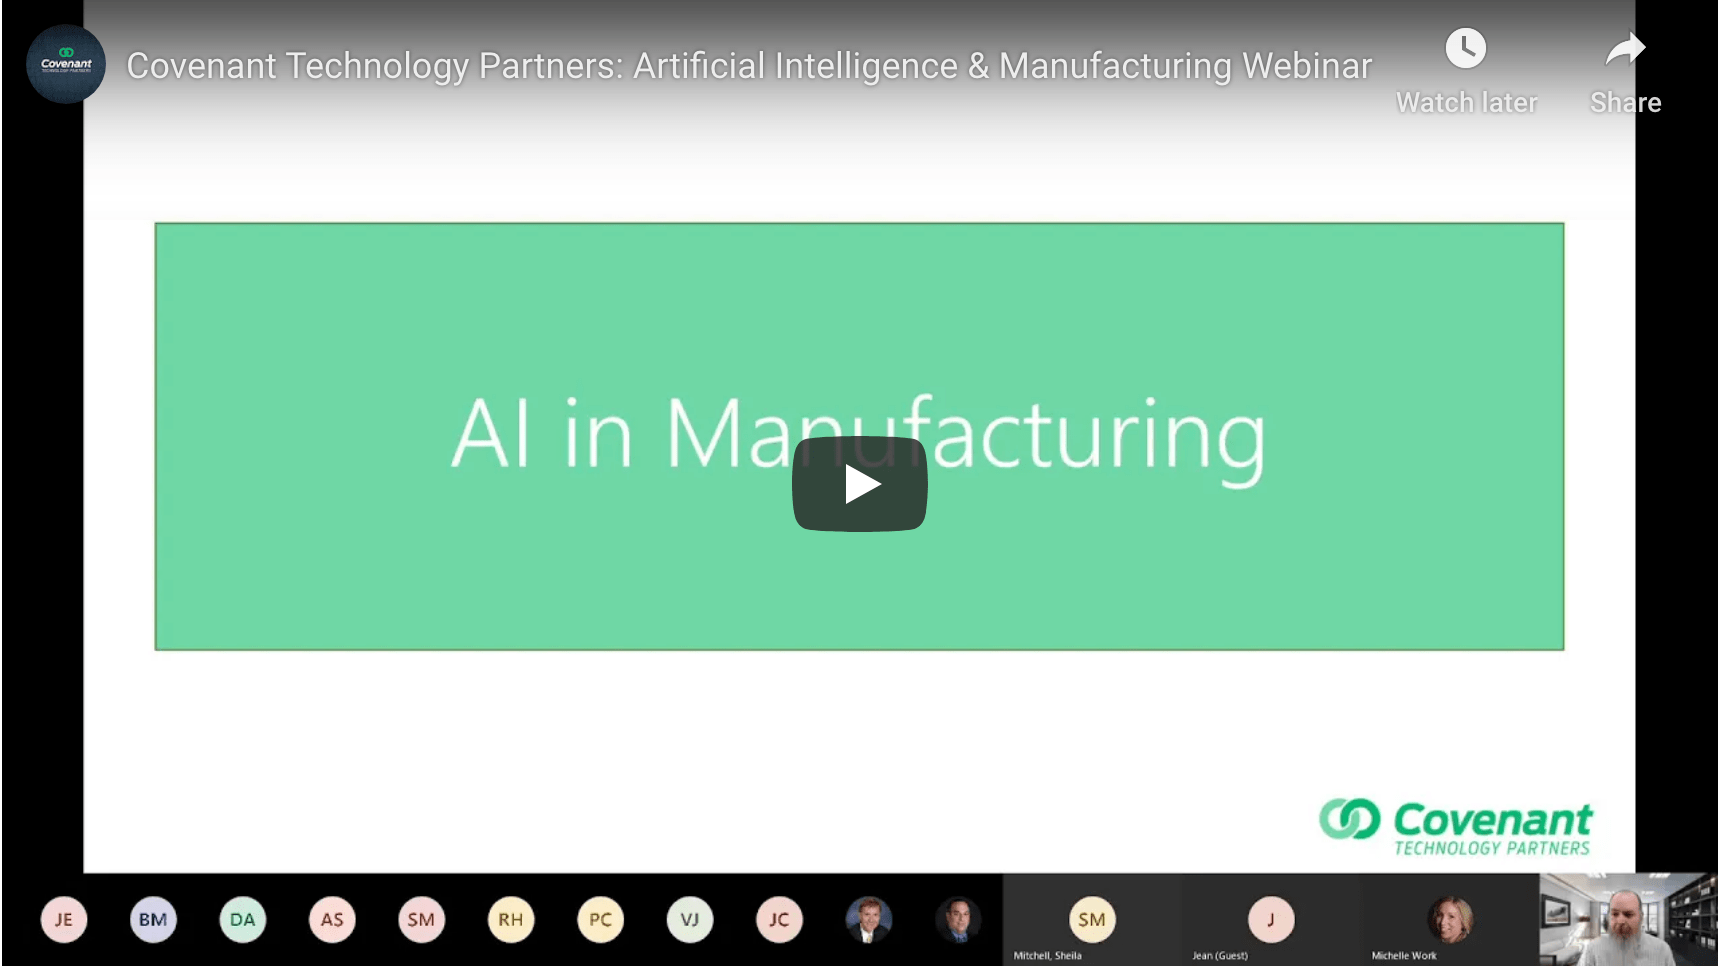 Covenant Technology Partners: AI in Manufacturing Webinar Image